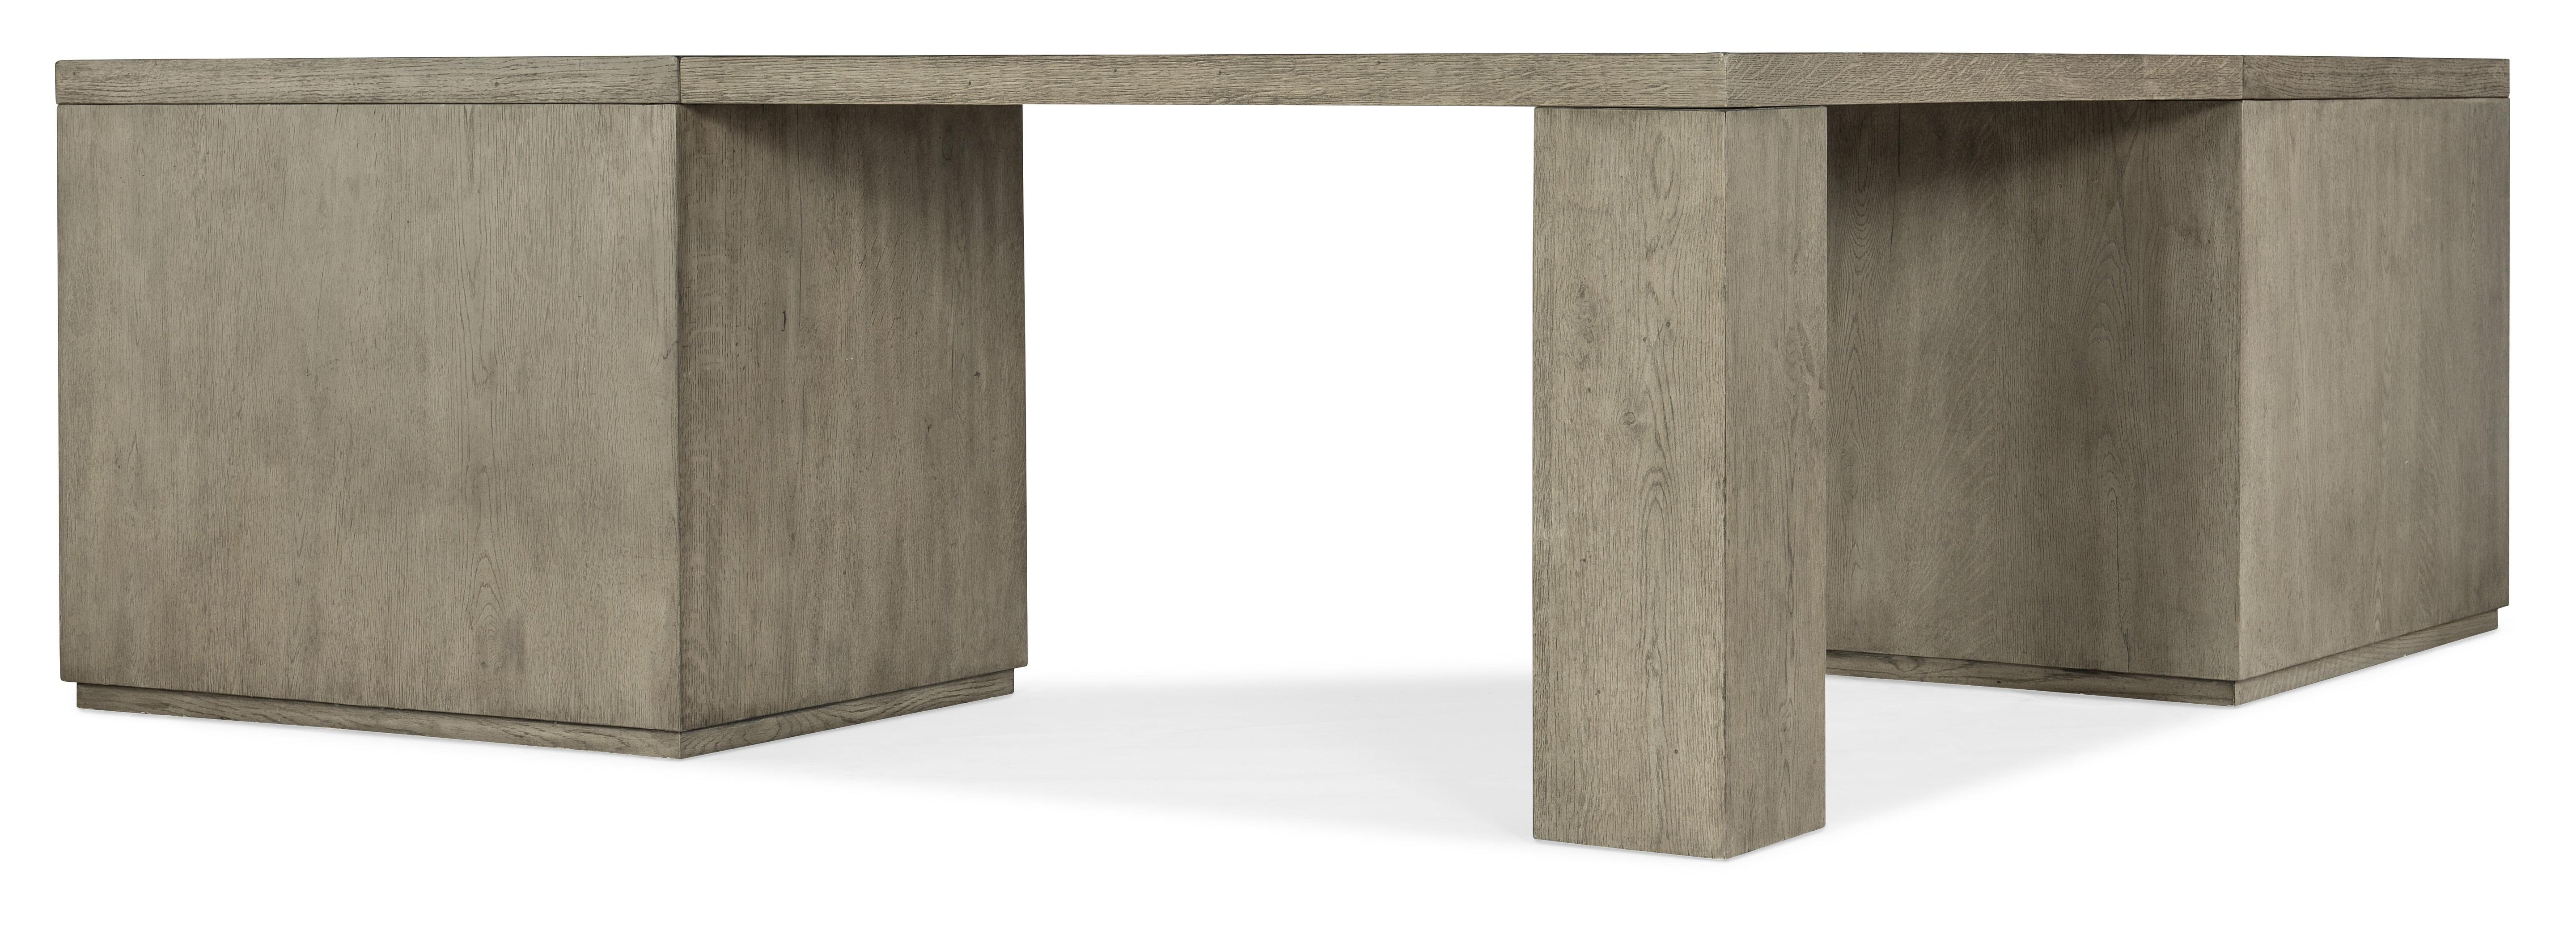 Linville Falls Corner Desk with Two Lateral Files